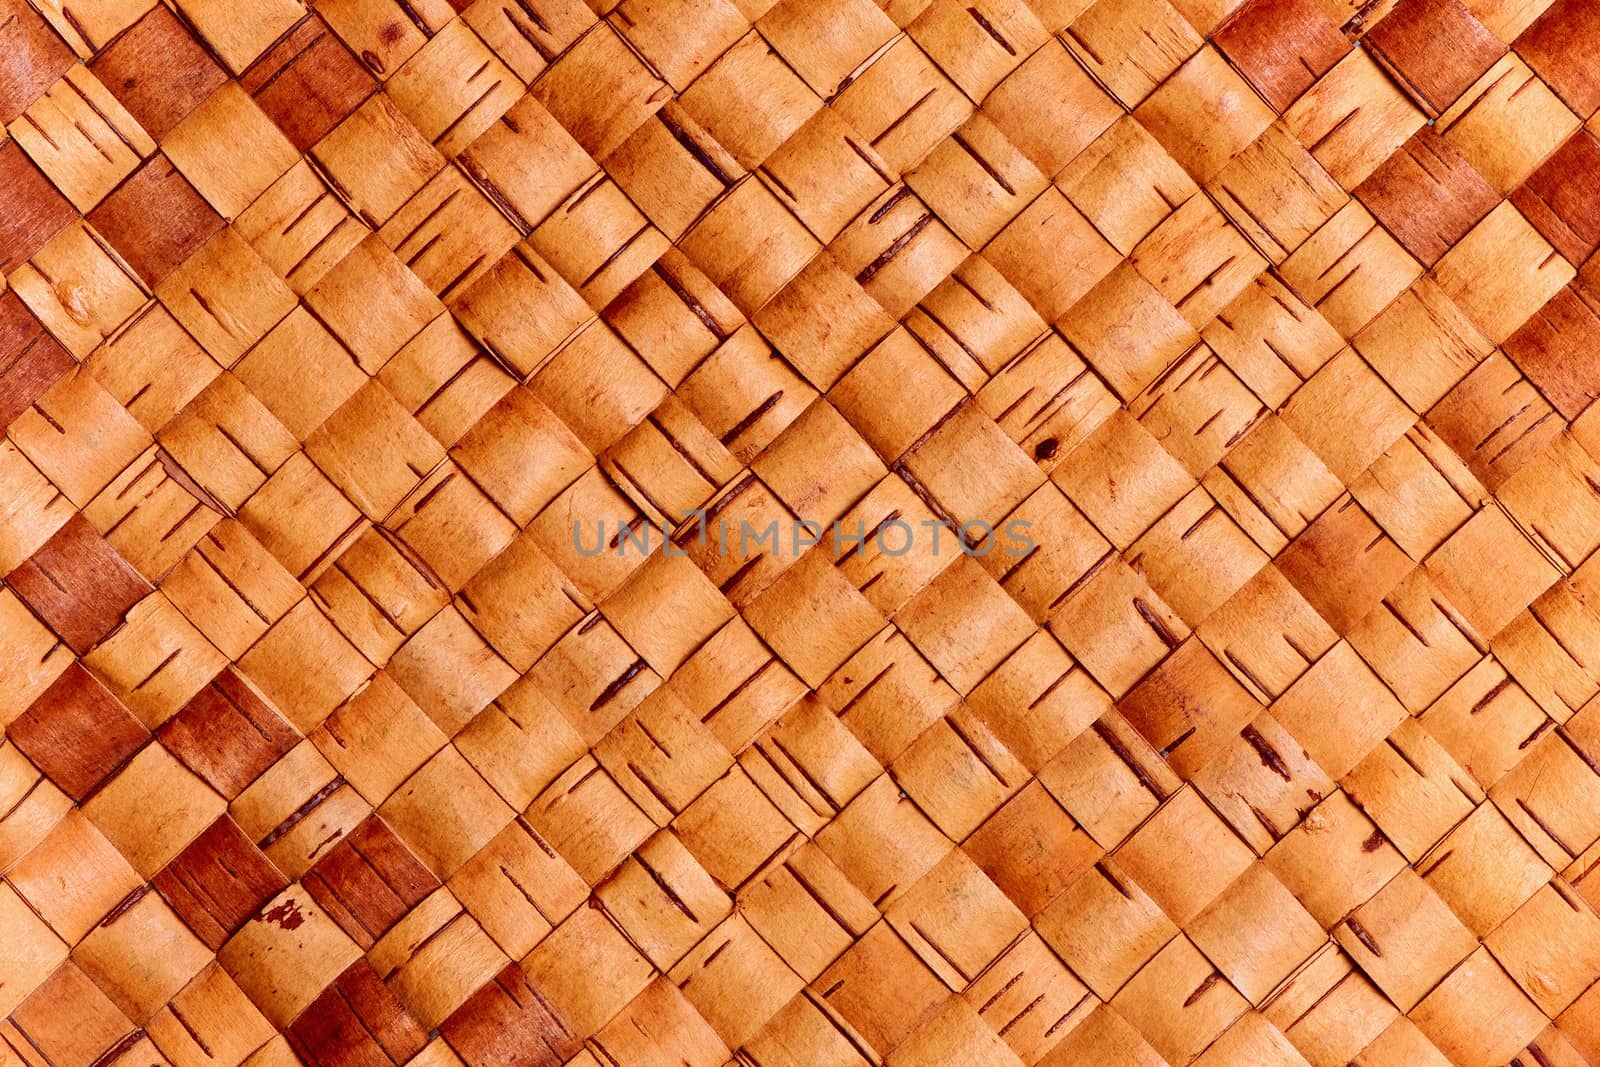 The Russian national trade - weaving from birch bark, it is possible to use as a background